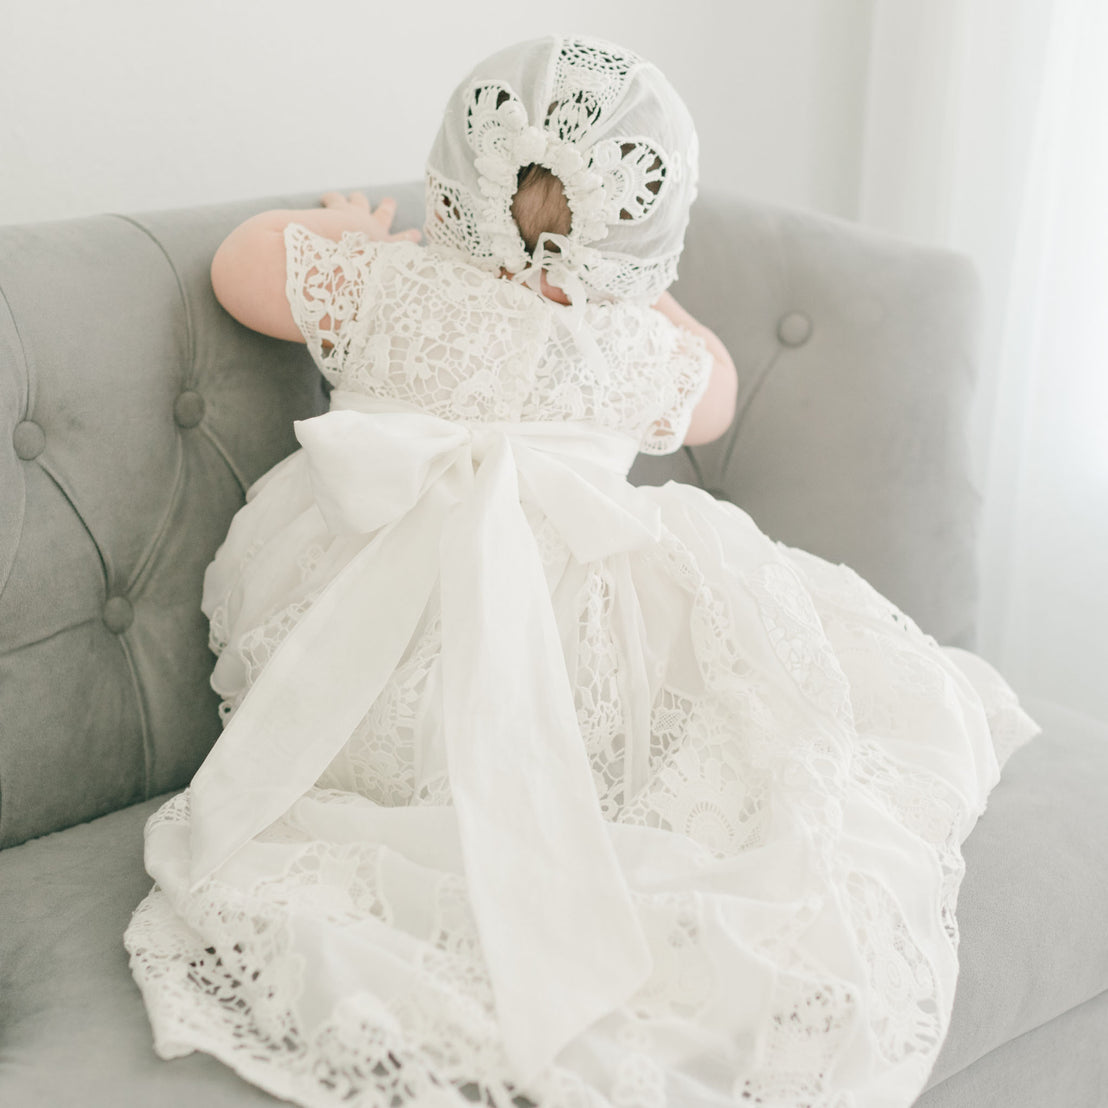 A baby in a Grace Christening Gown & Bonnet sits on a gray tufted couch, playful and content. The focus is on the intricate textures of the back of the dress.